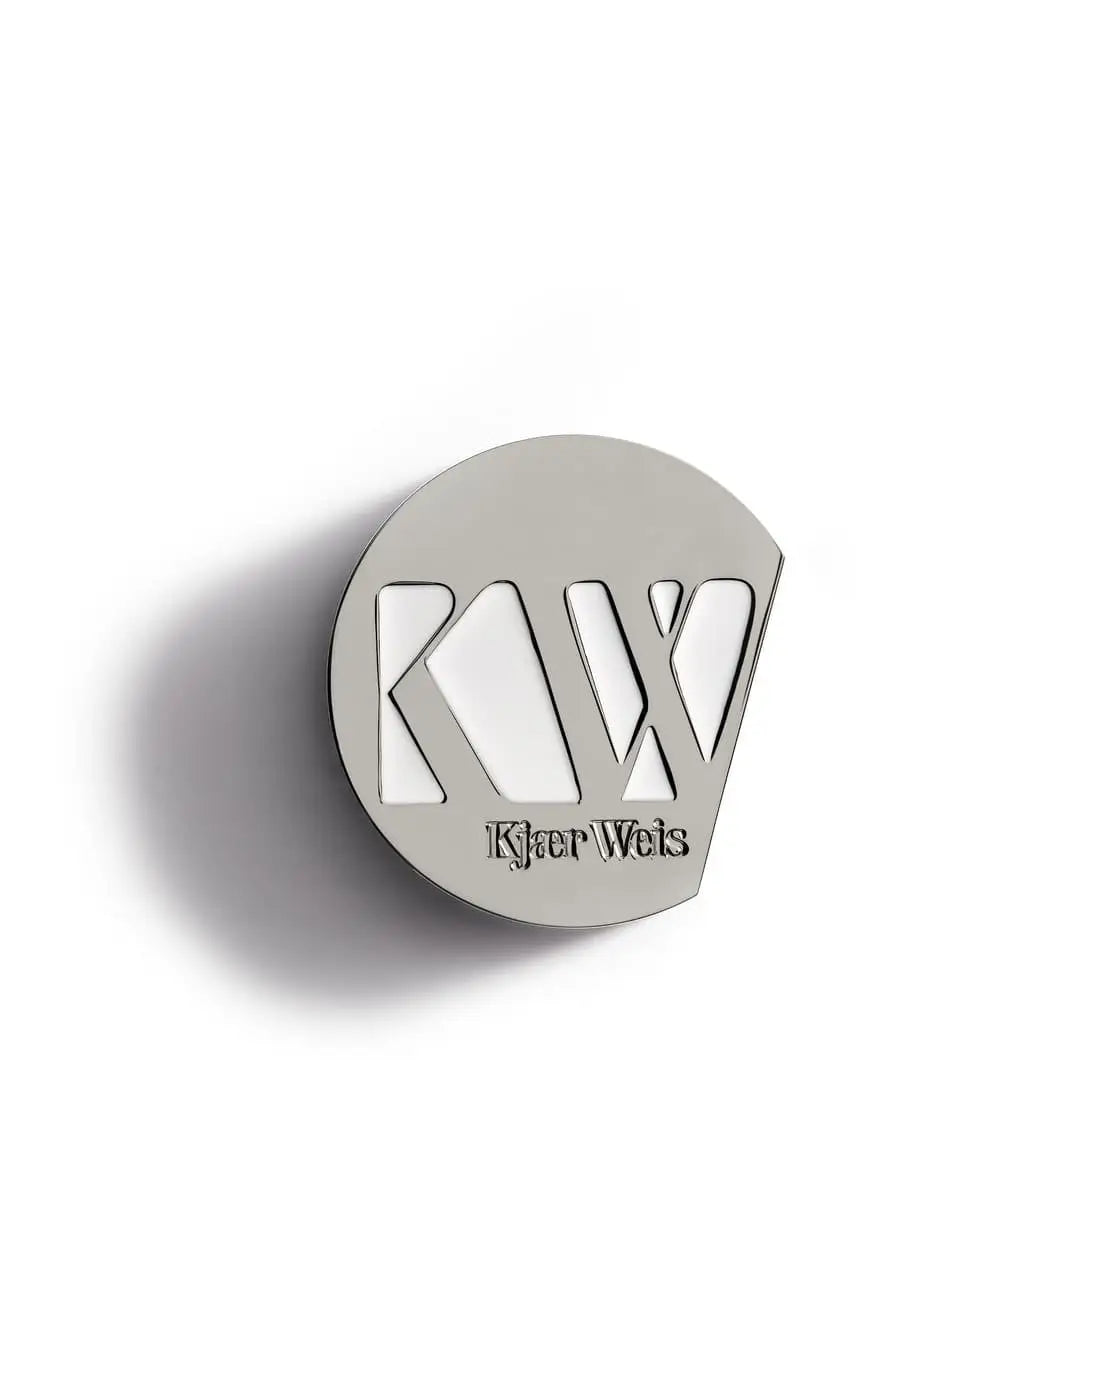 Kjaer Weis Iconic Edition  Case for Powder (Powder, Bronzer, Highlighter) - Kjaer Weis Iconic Edition  Case for Powder (Powder, Bronzer, Highlighter)